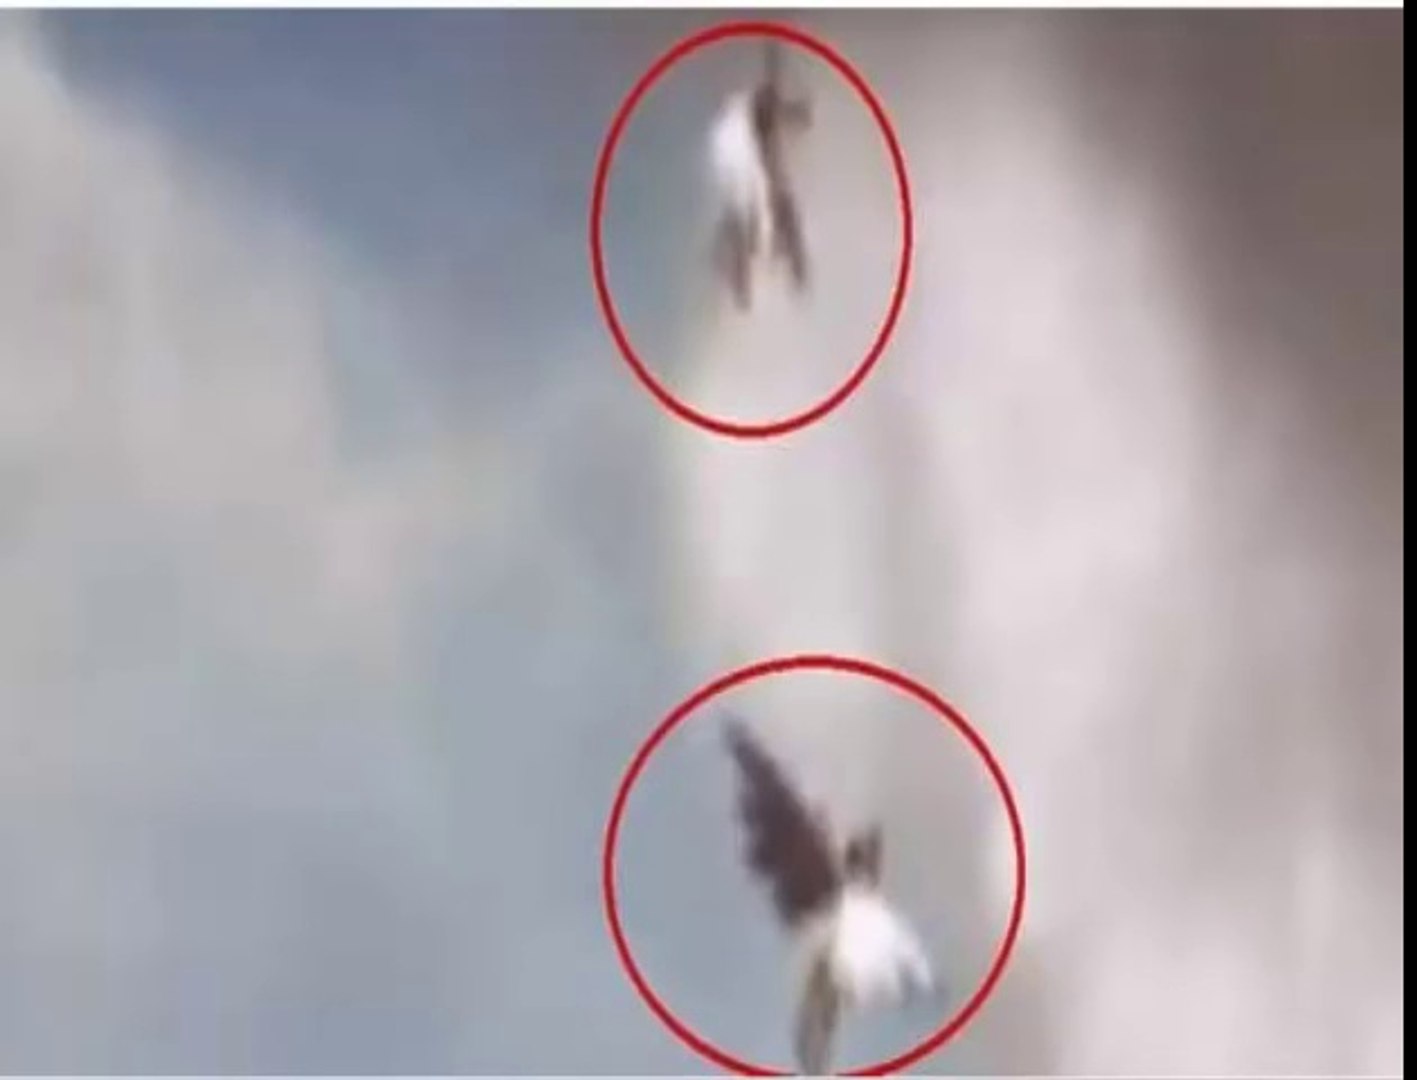 2 Angels Caught On Camera Flying In Brazil - December 2, 2014 - video  Dailymotion